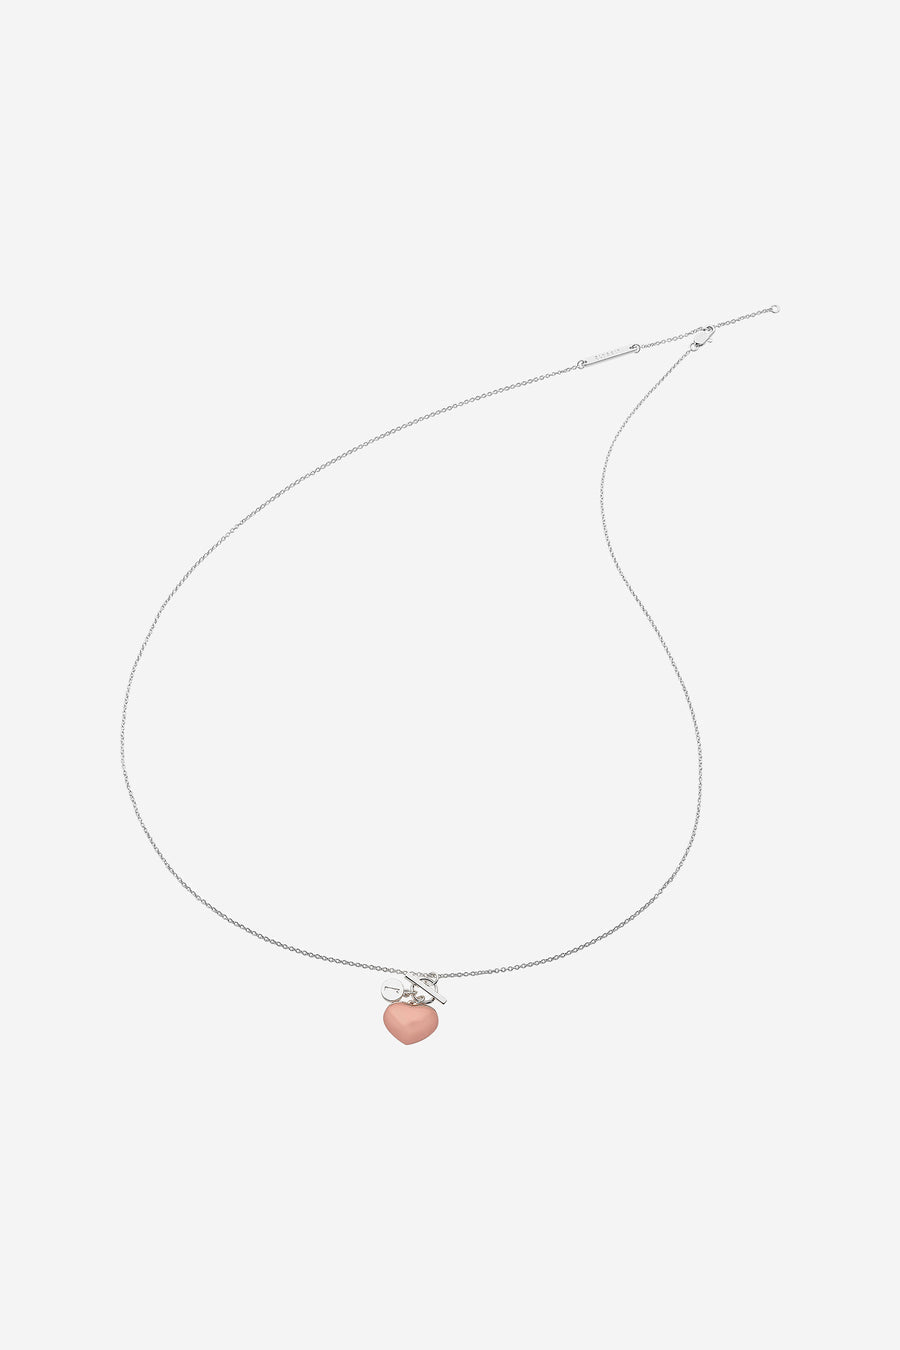 Bella Silver /Rose Gold Necklace